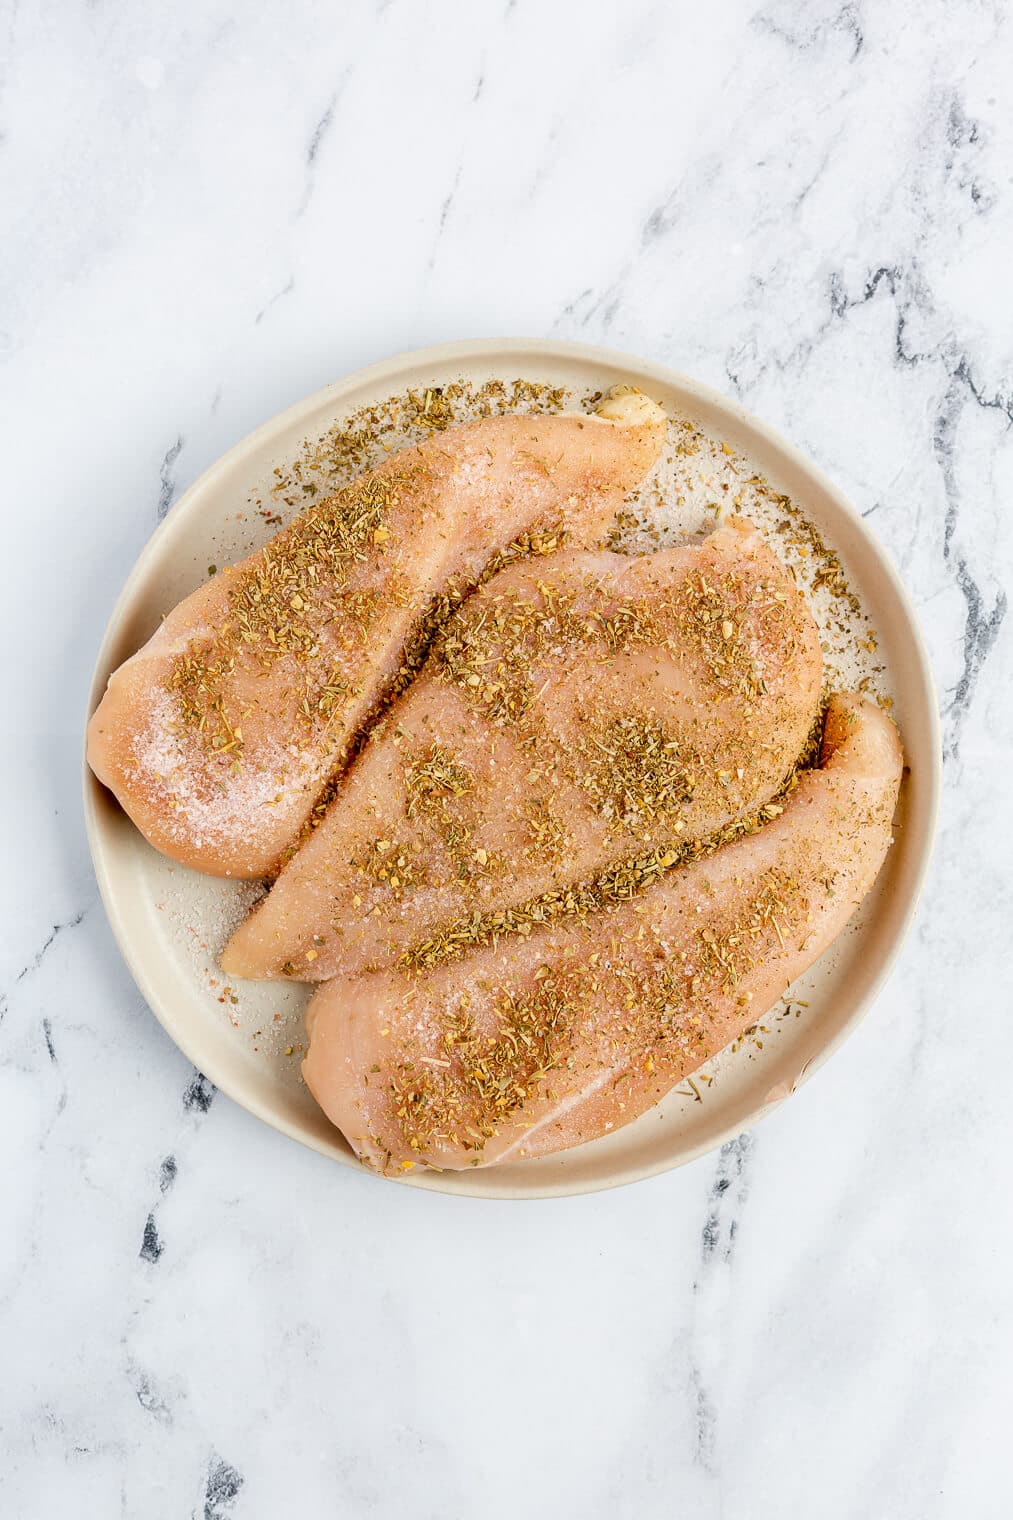 3 raw chicken breasts dusted with salt and Italian seasoning sitting on a plate.